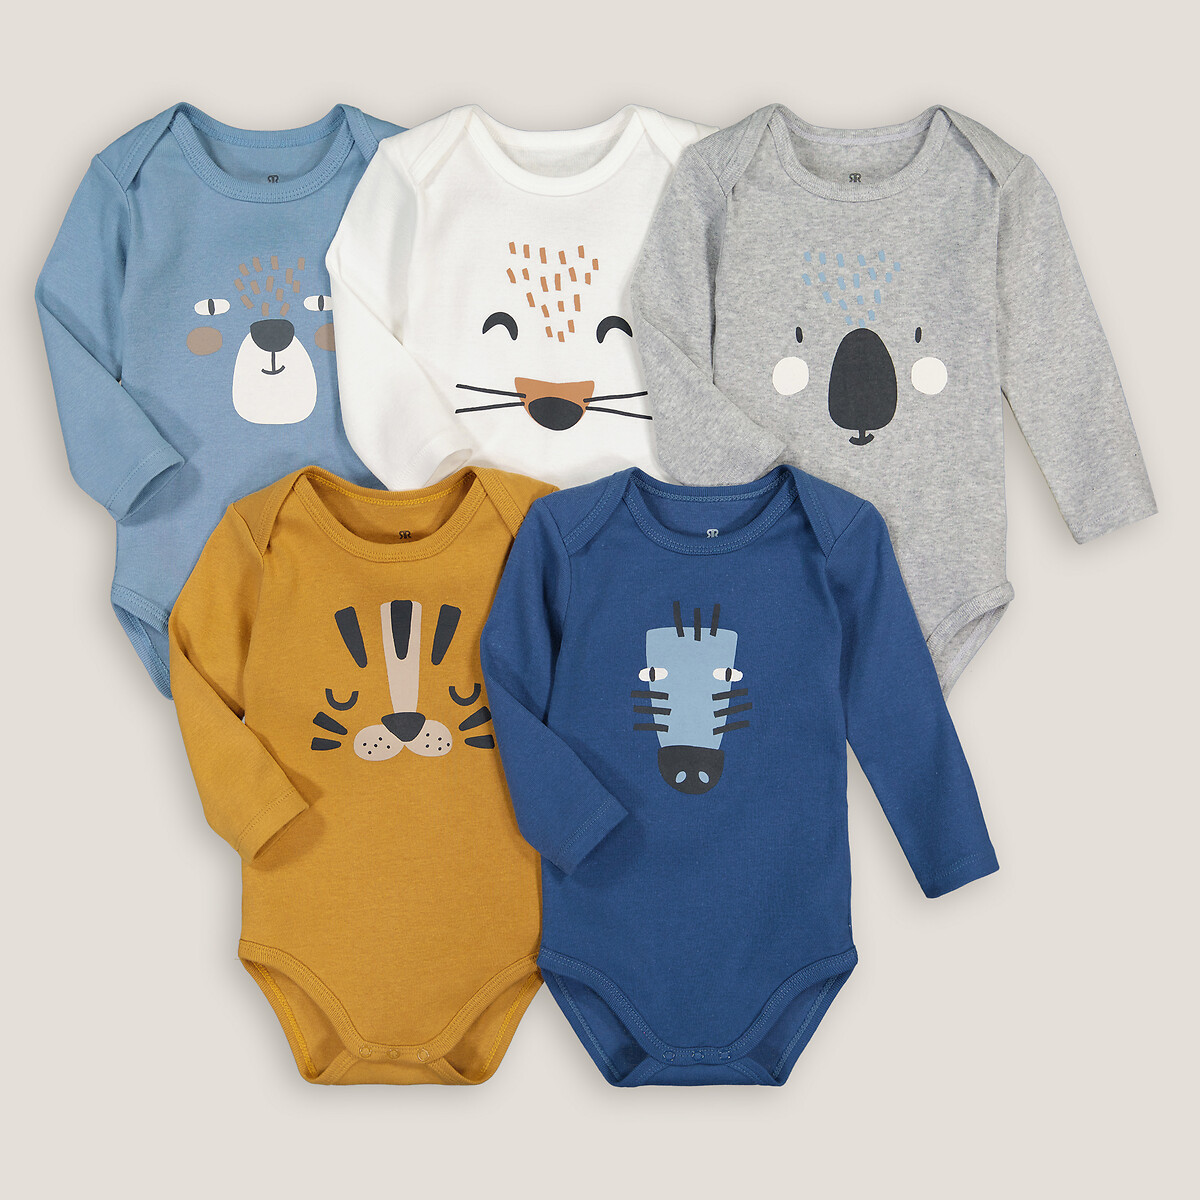 Pack of 5 Bodysuits with Animal Prints and Long Sleeves